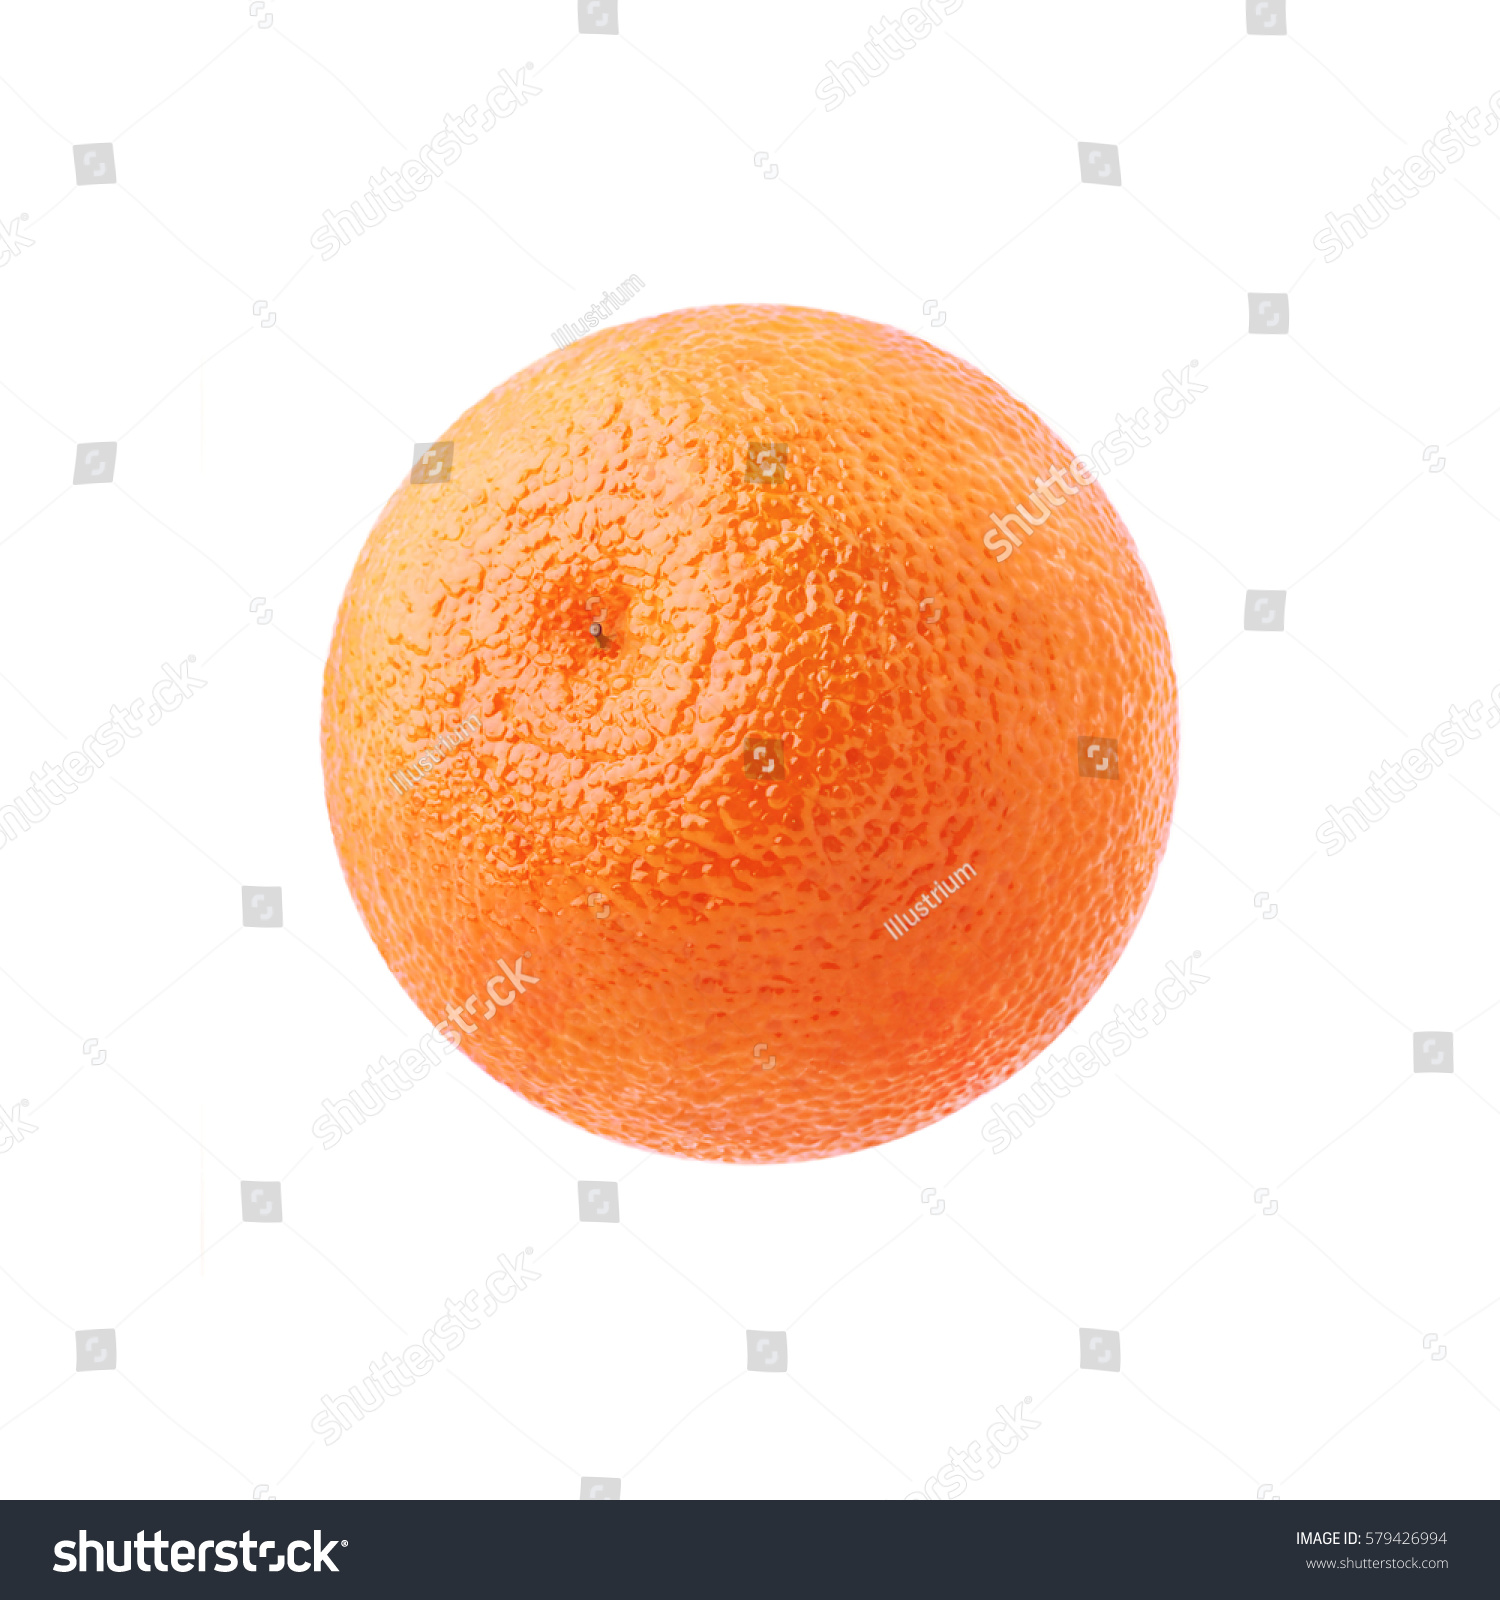 One Ripe Juicy Oranges Isolated On Stock Photo (Edit Now)- Shutterstock